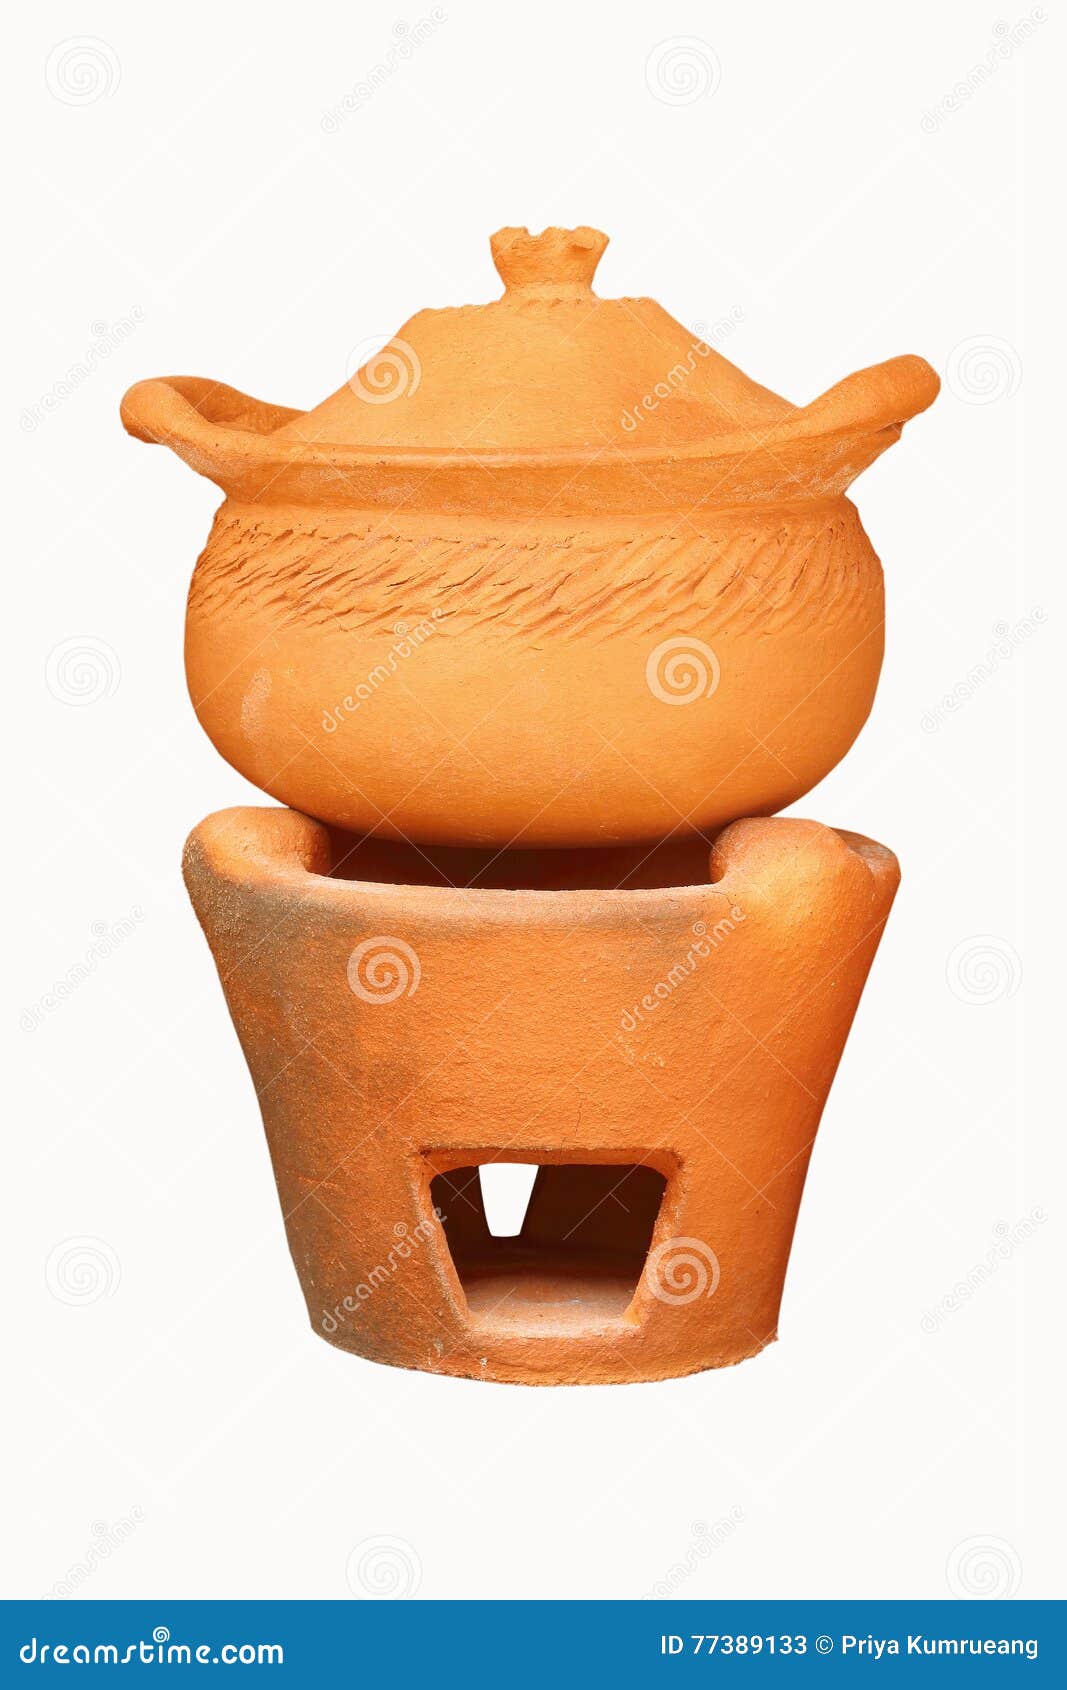 Clay Pot For Cook And Clay Stove On White Background Stock Image Image Of Food Kitchenware 77389133